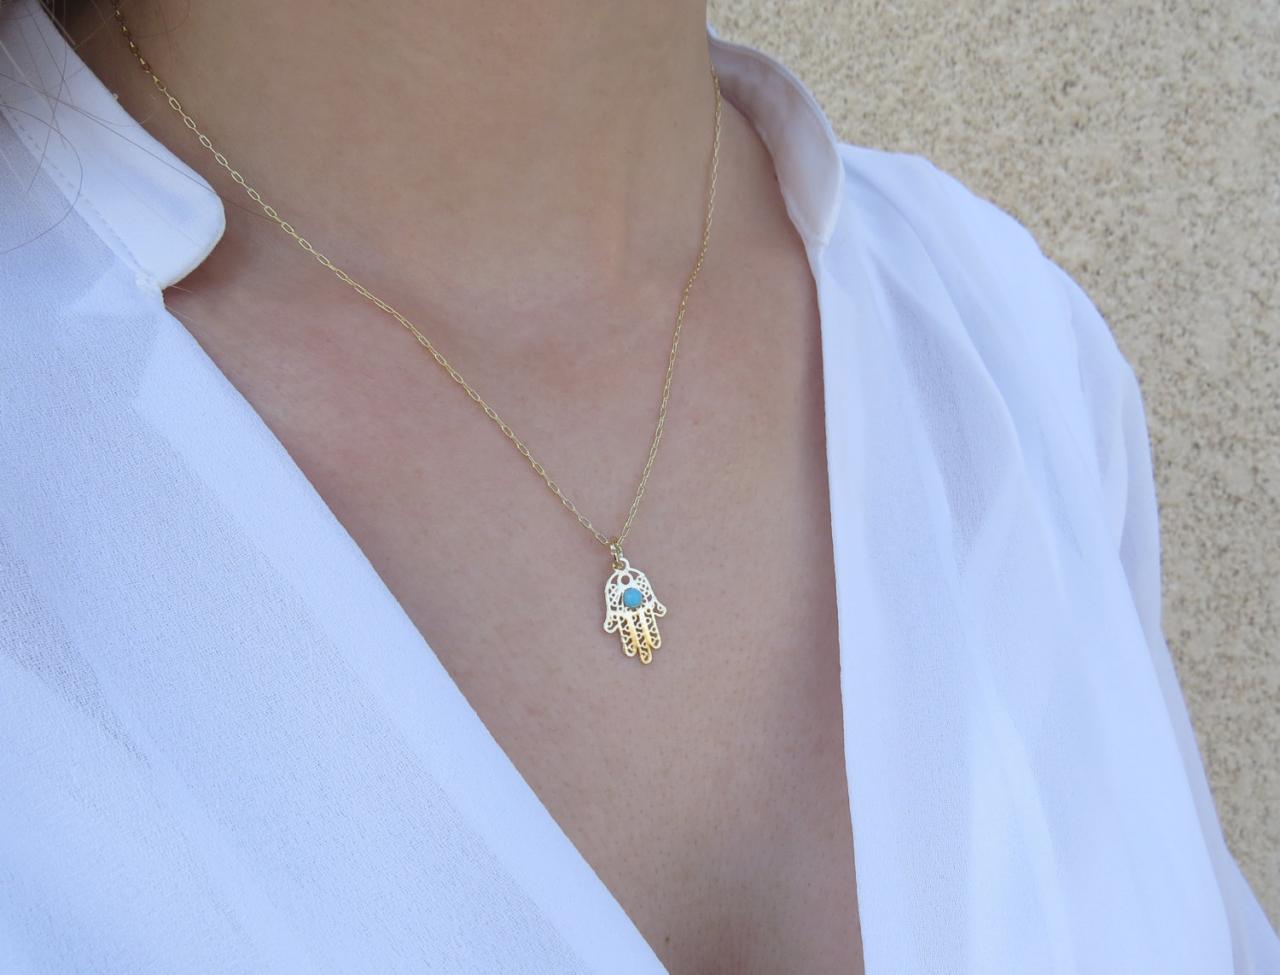 Gold Hand Necklace - Gold Hamsa Necklace, Delicate Necklace, Gold Hand With Turquoise, Jewish Jewelry, Hand Pendant, Gold Charm Necklace